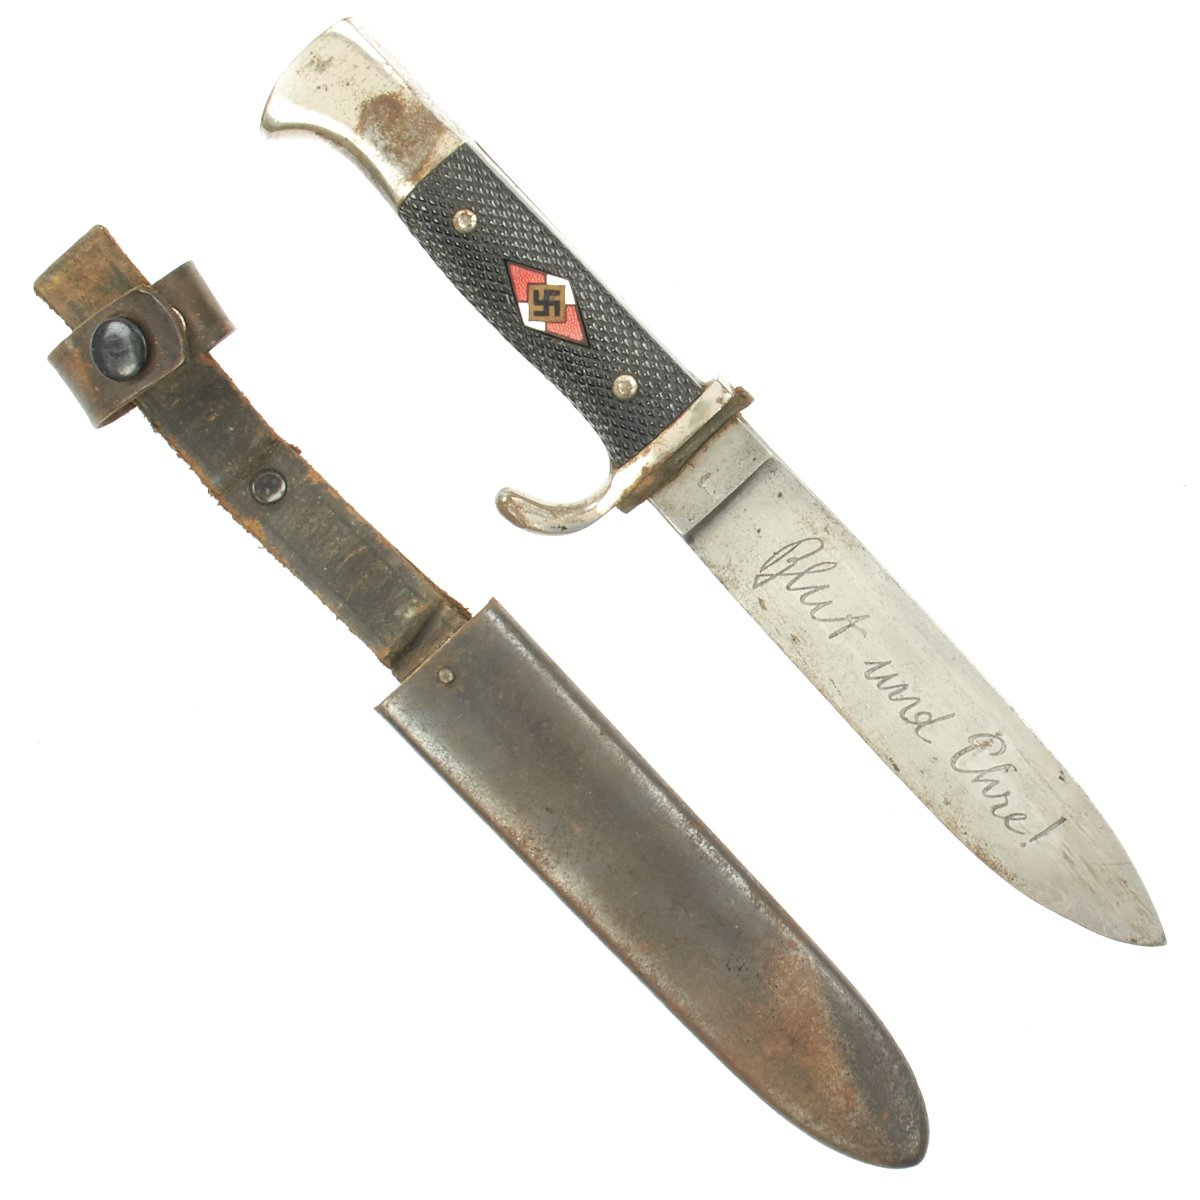 Sold At Auction: EICKHORN SOLINGEN STAG KNIFE BAYONET WWII, 56% OFF